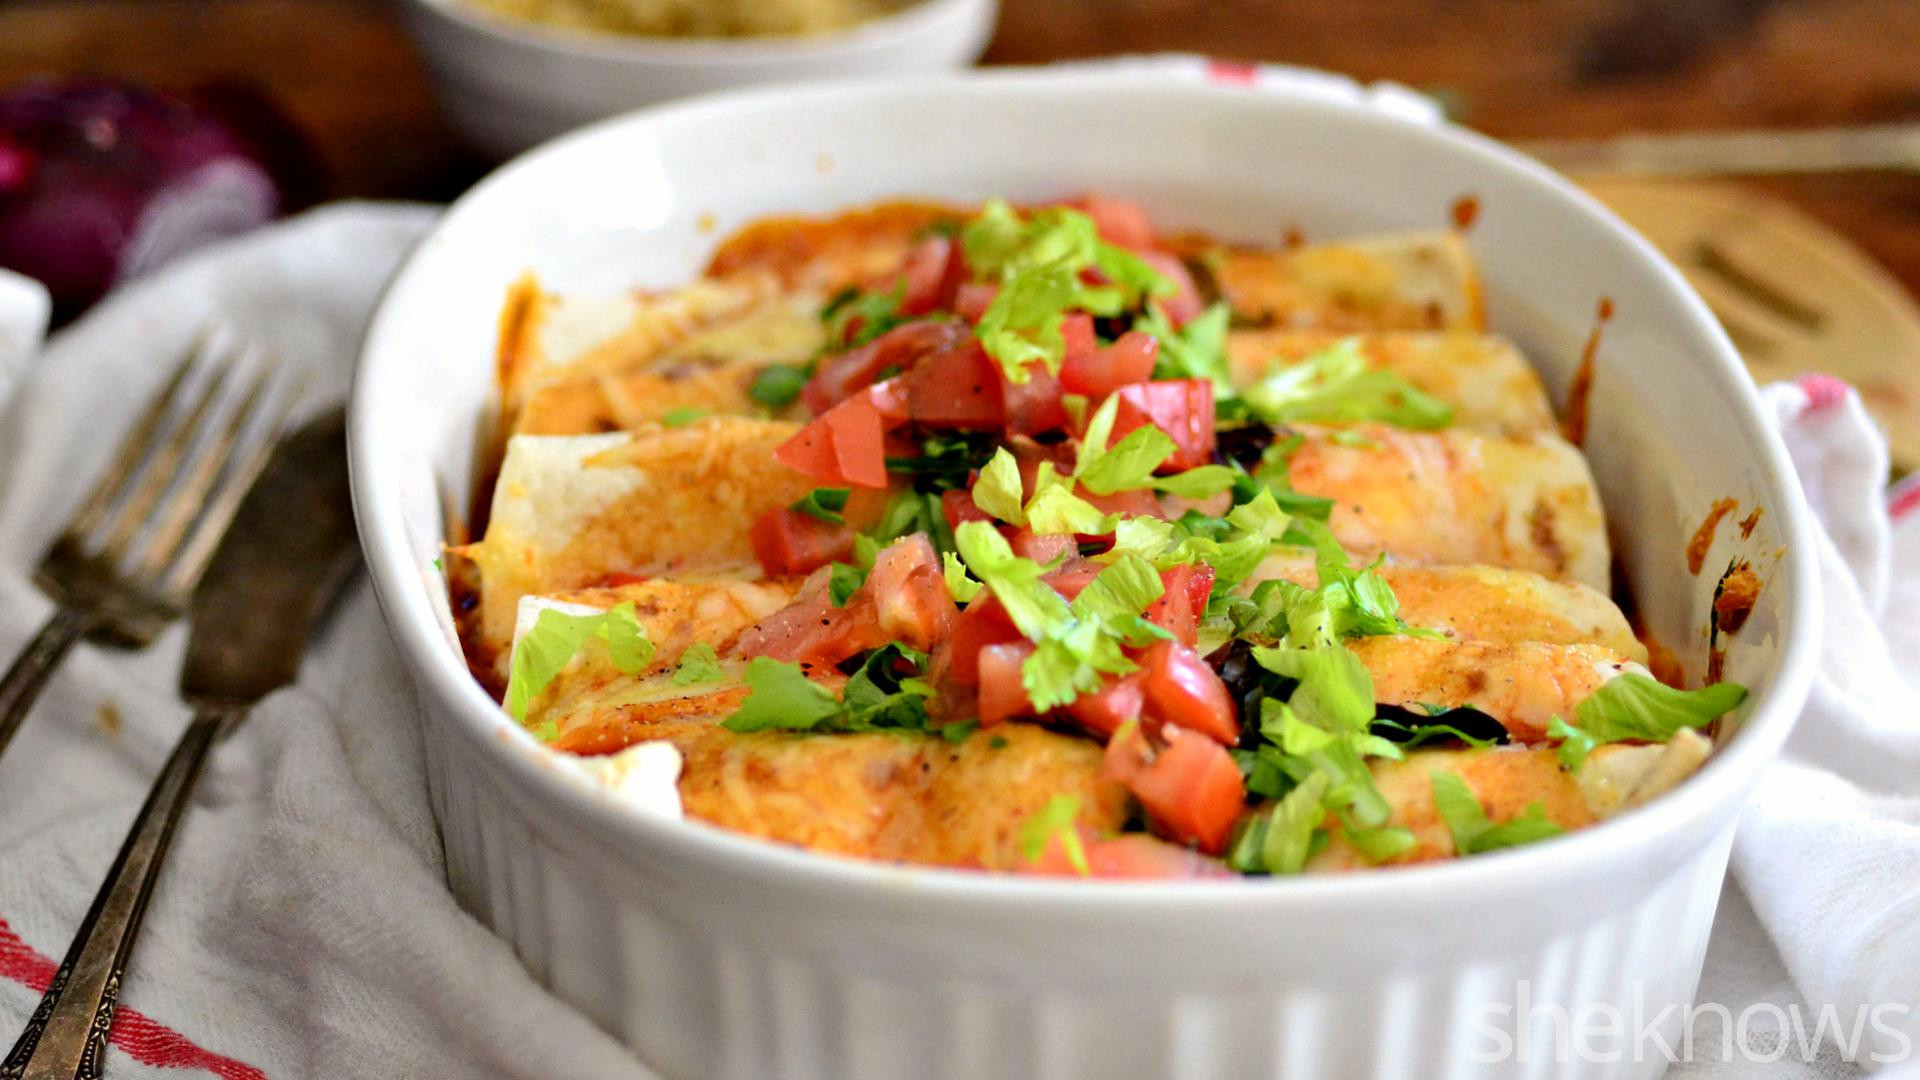 Best Ever Low Calorie Mexican Recipes